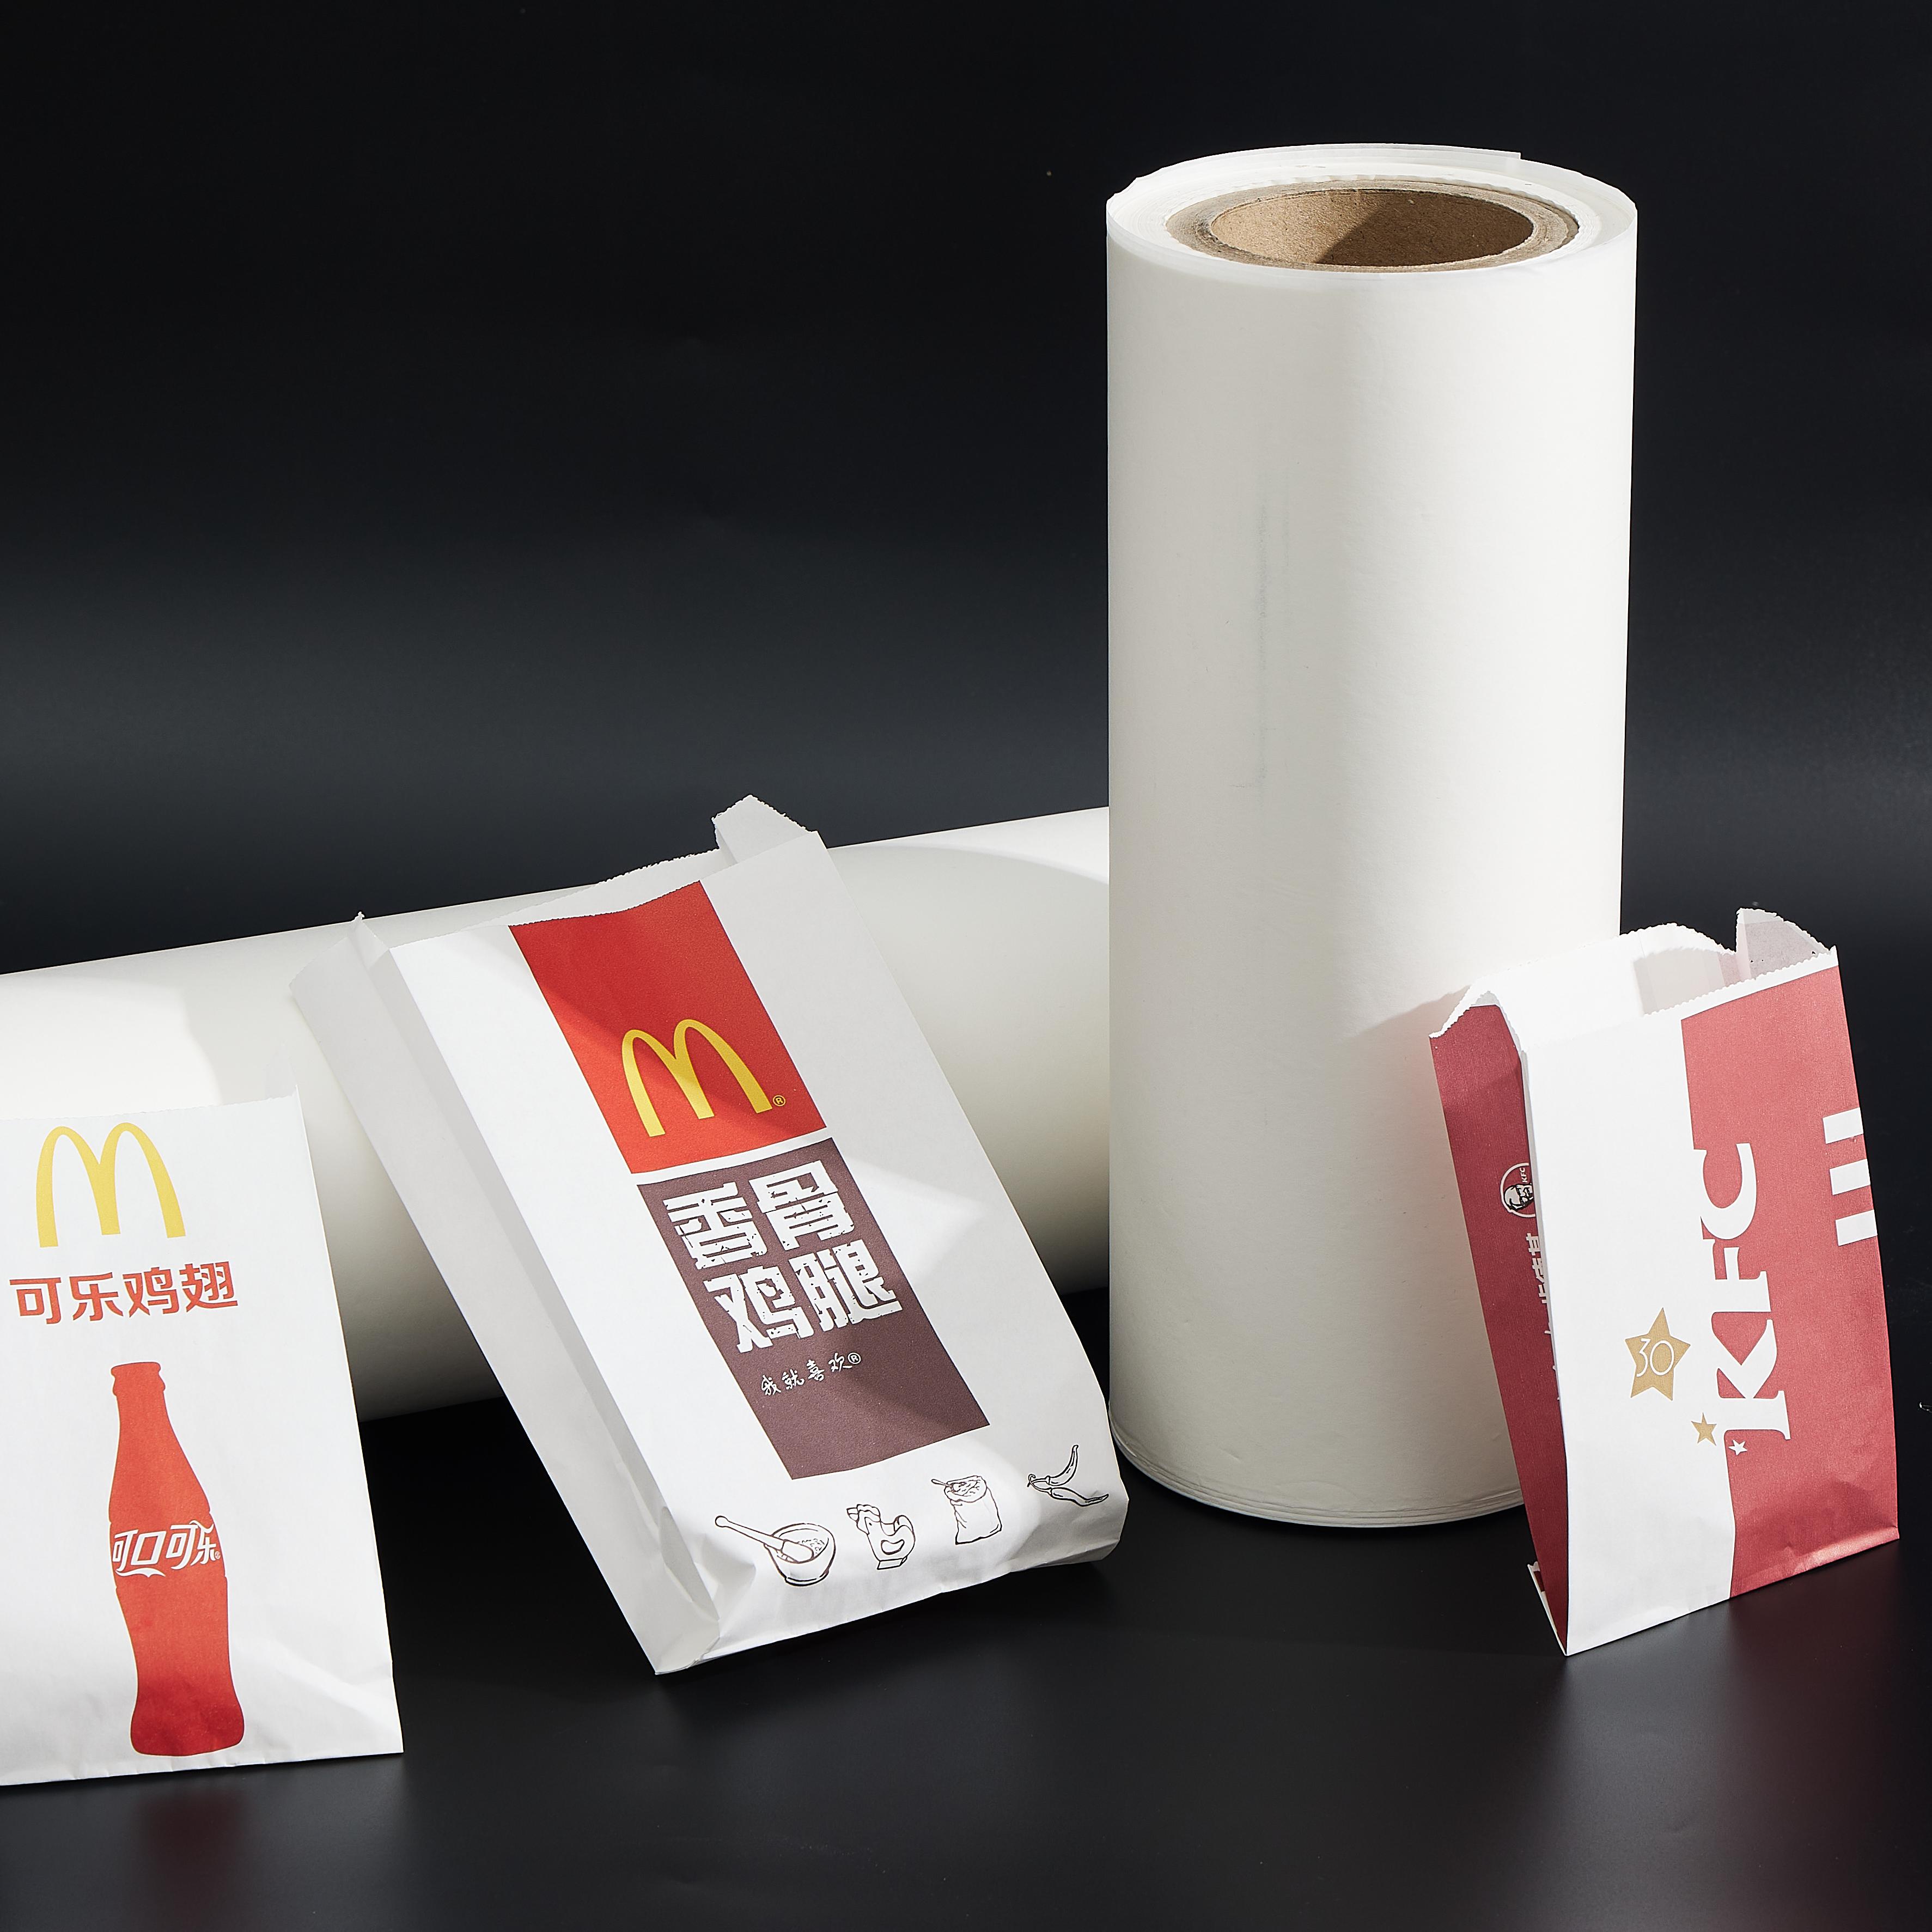 38-40g Pfas-Free Greaseproof Paper High Quality Ogr Paper for Food Wrapping FDA EU Standards